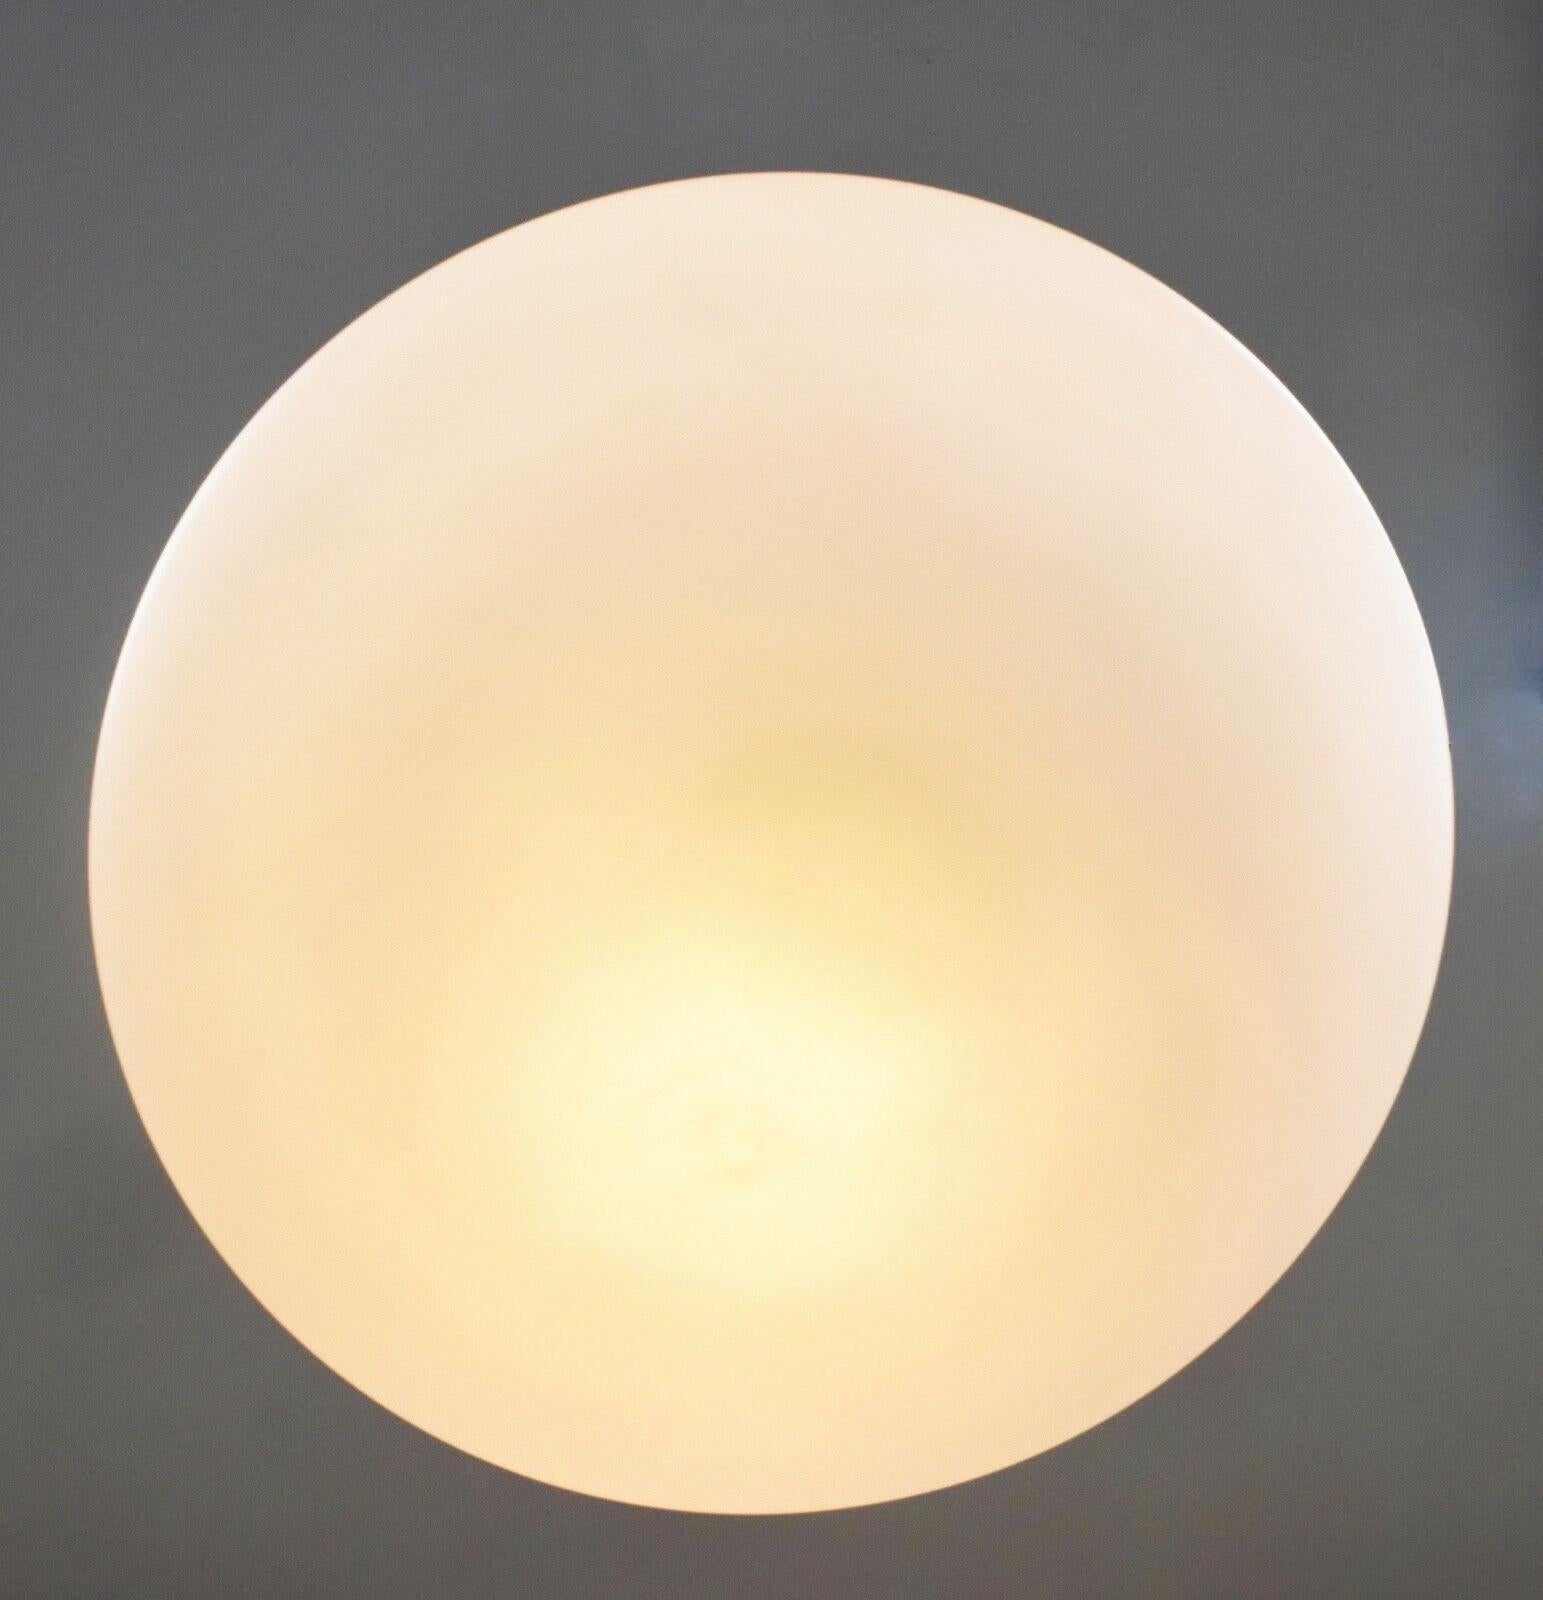 Pendant by Arredoluce, Italy, 1950s, Brushed Satin Glass Diffuser Diameter 20